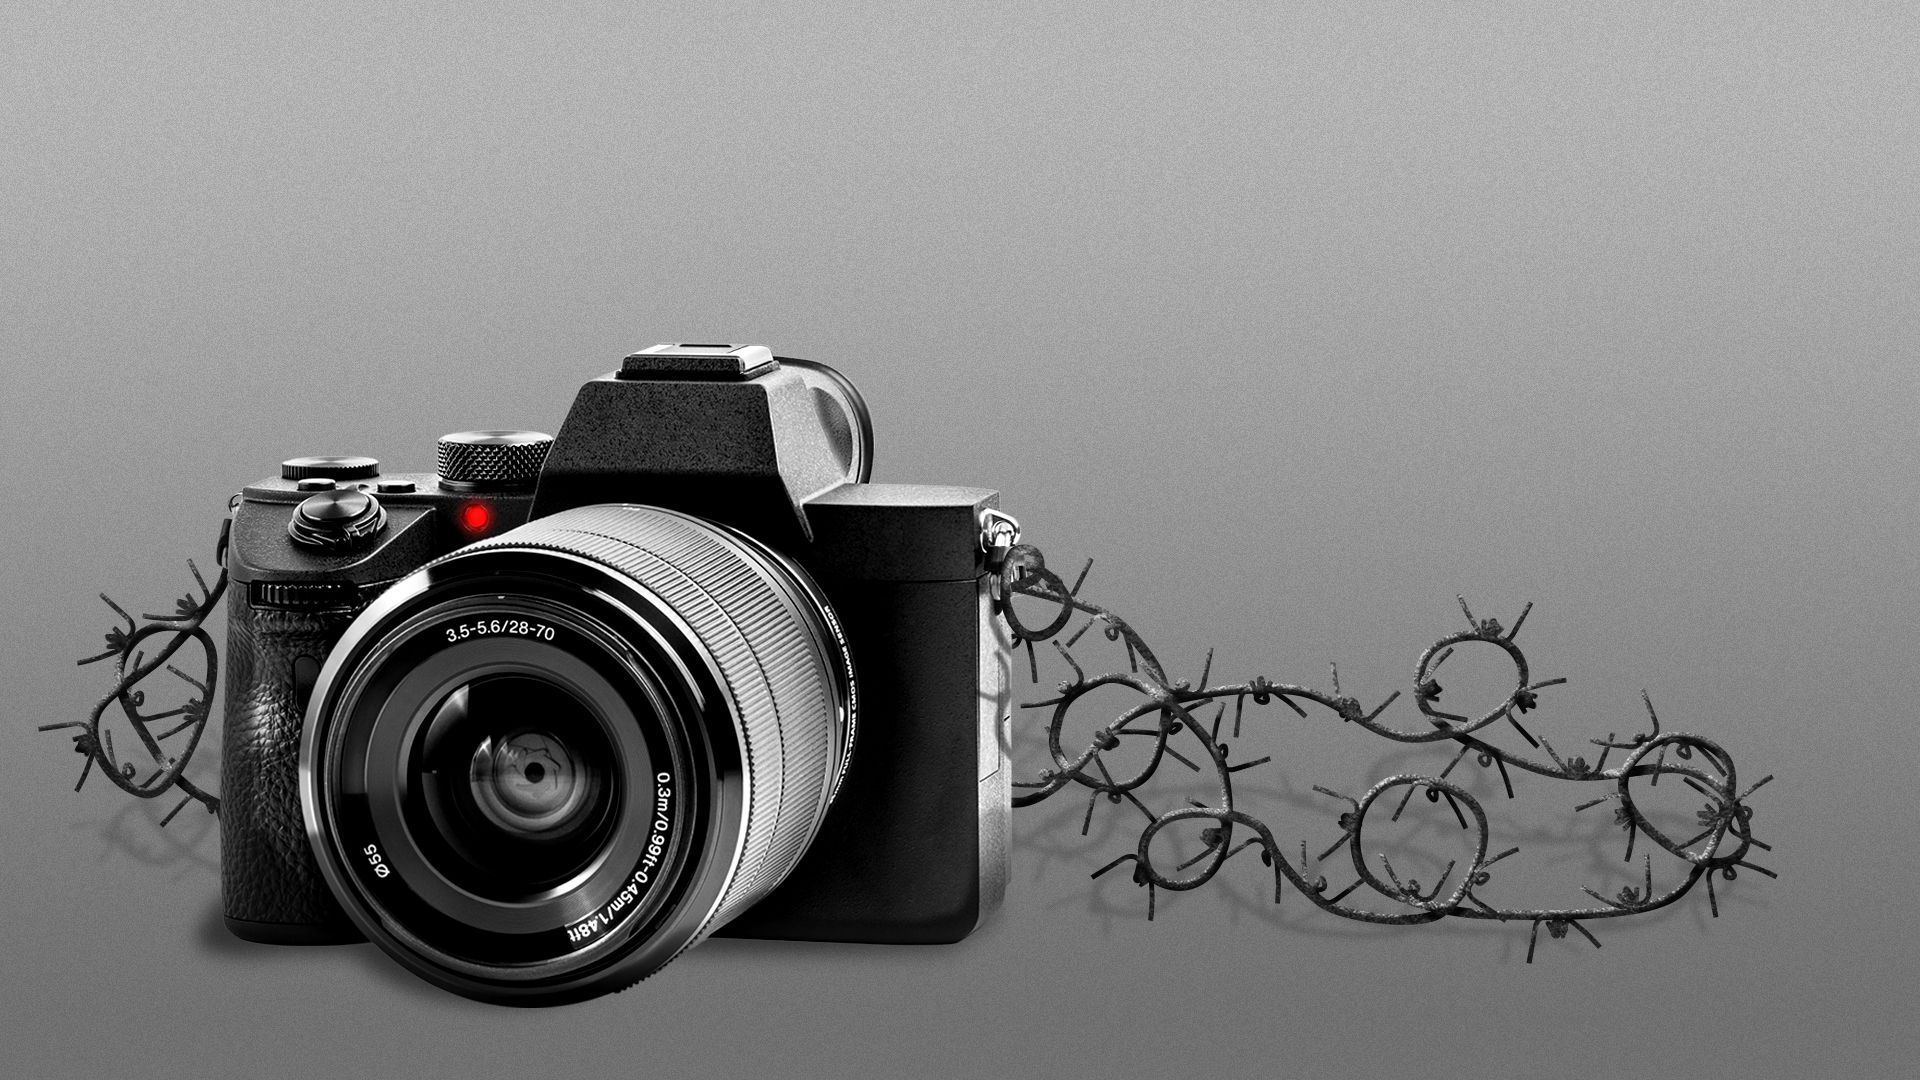 An illustration shows a camera connected to barbed wire.